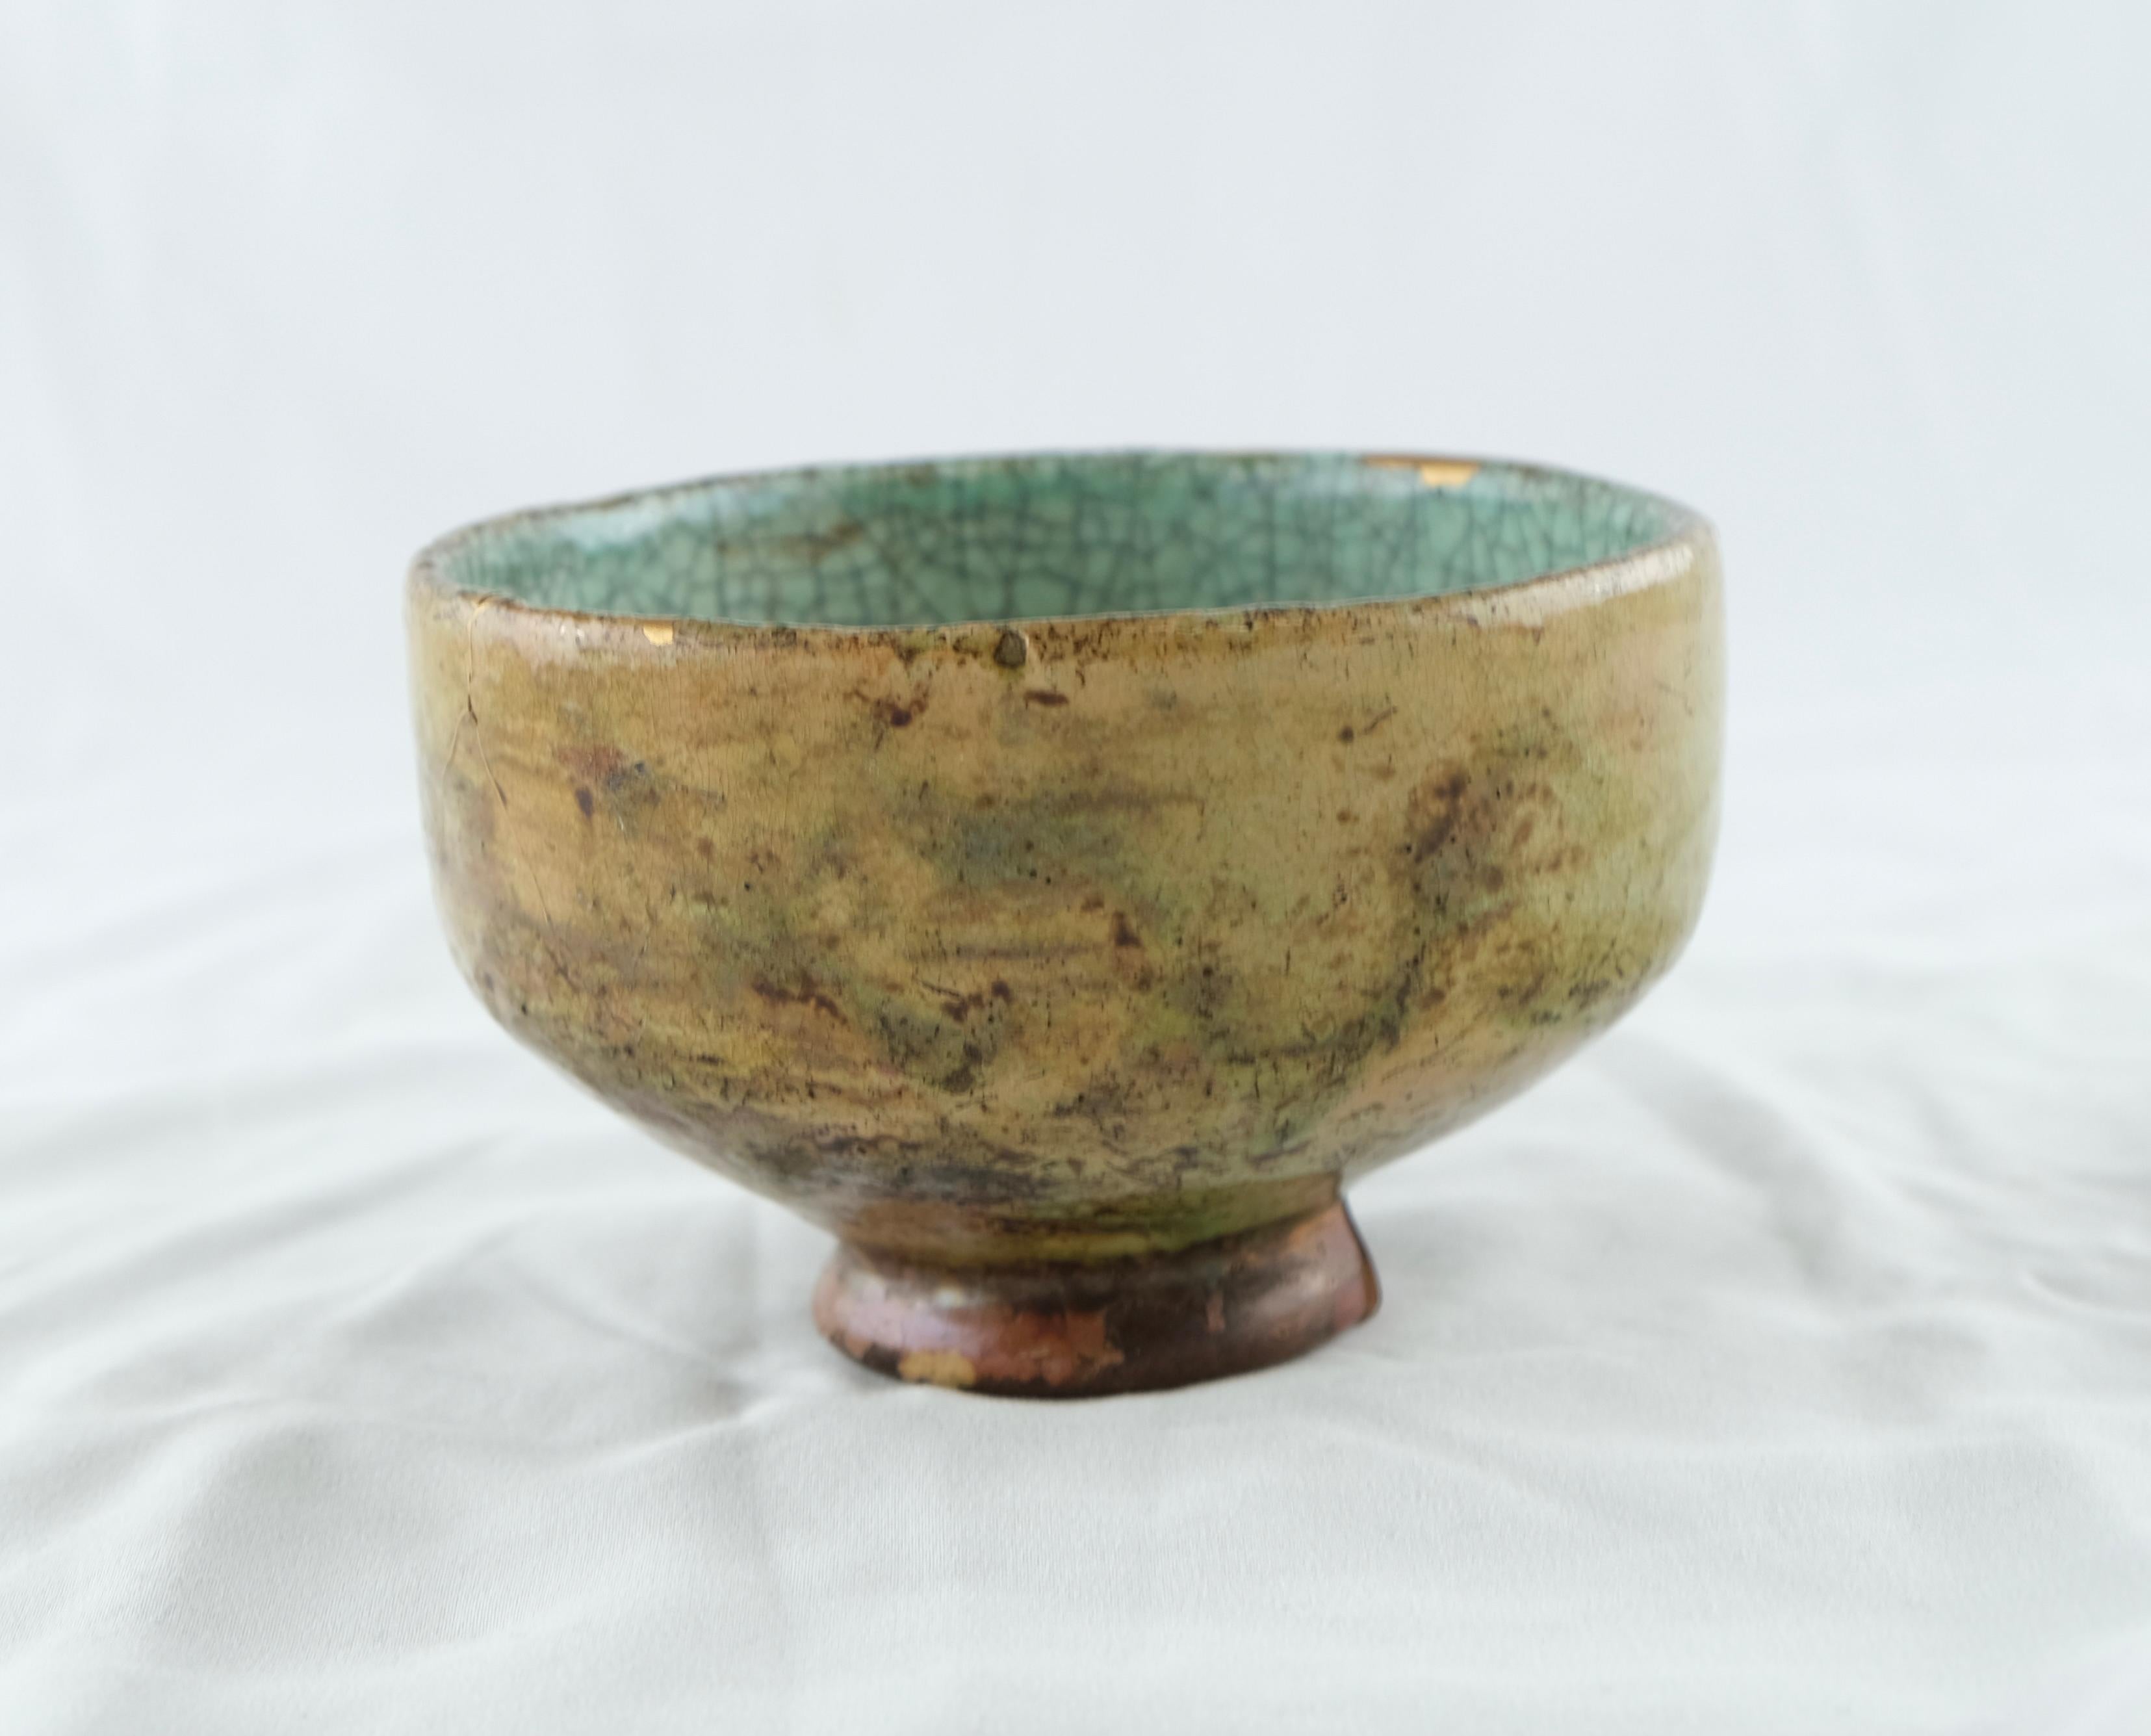 A well made Japanese Chawan. Earthenware glazed in yellow and turquoise colours. Some chips on the upper edge.
On the bottom there is an old marking, probably from a collection.